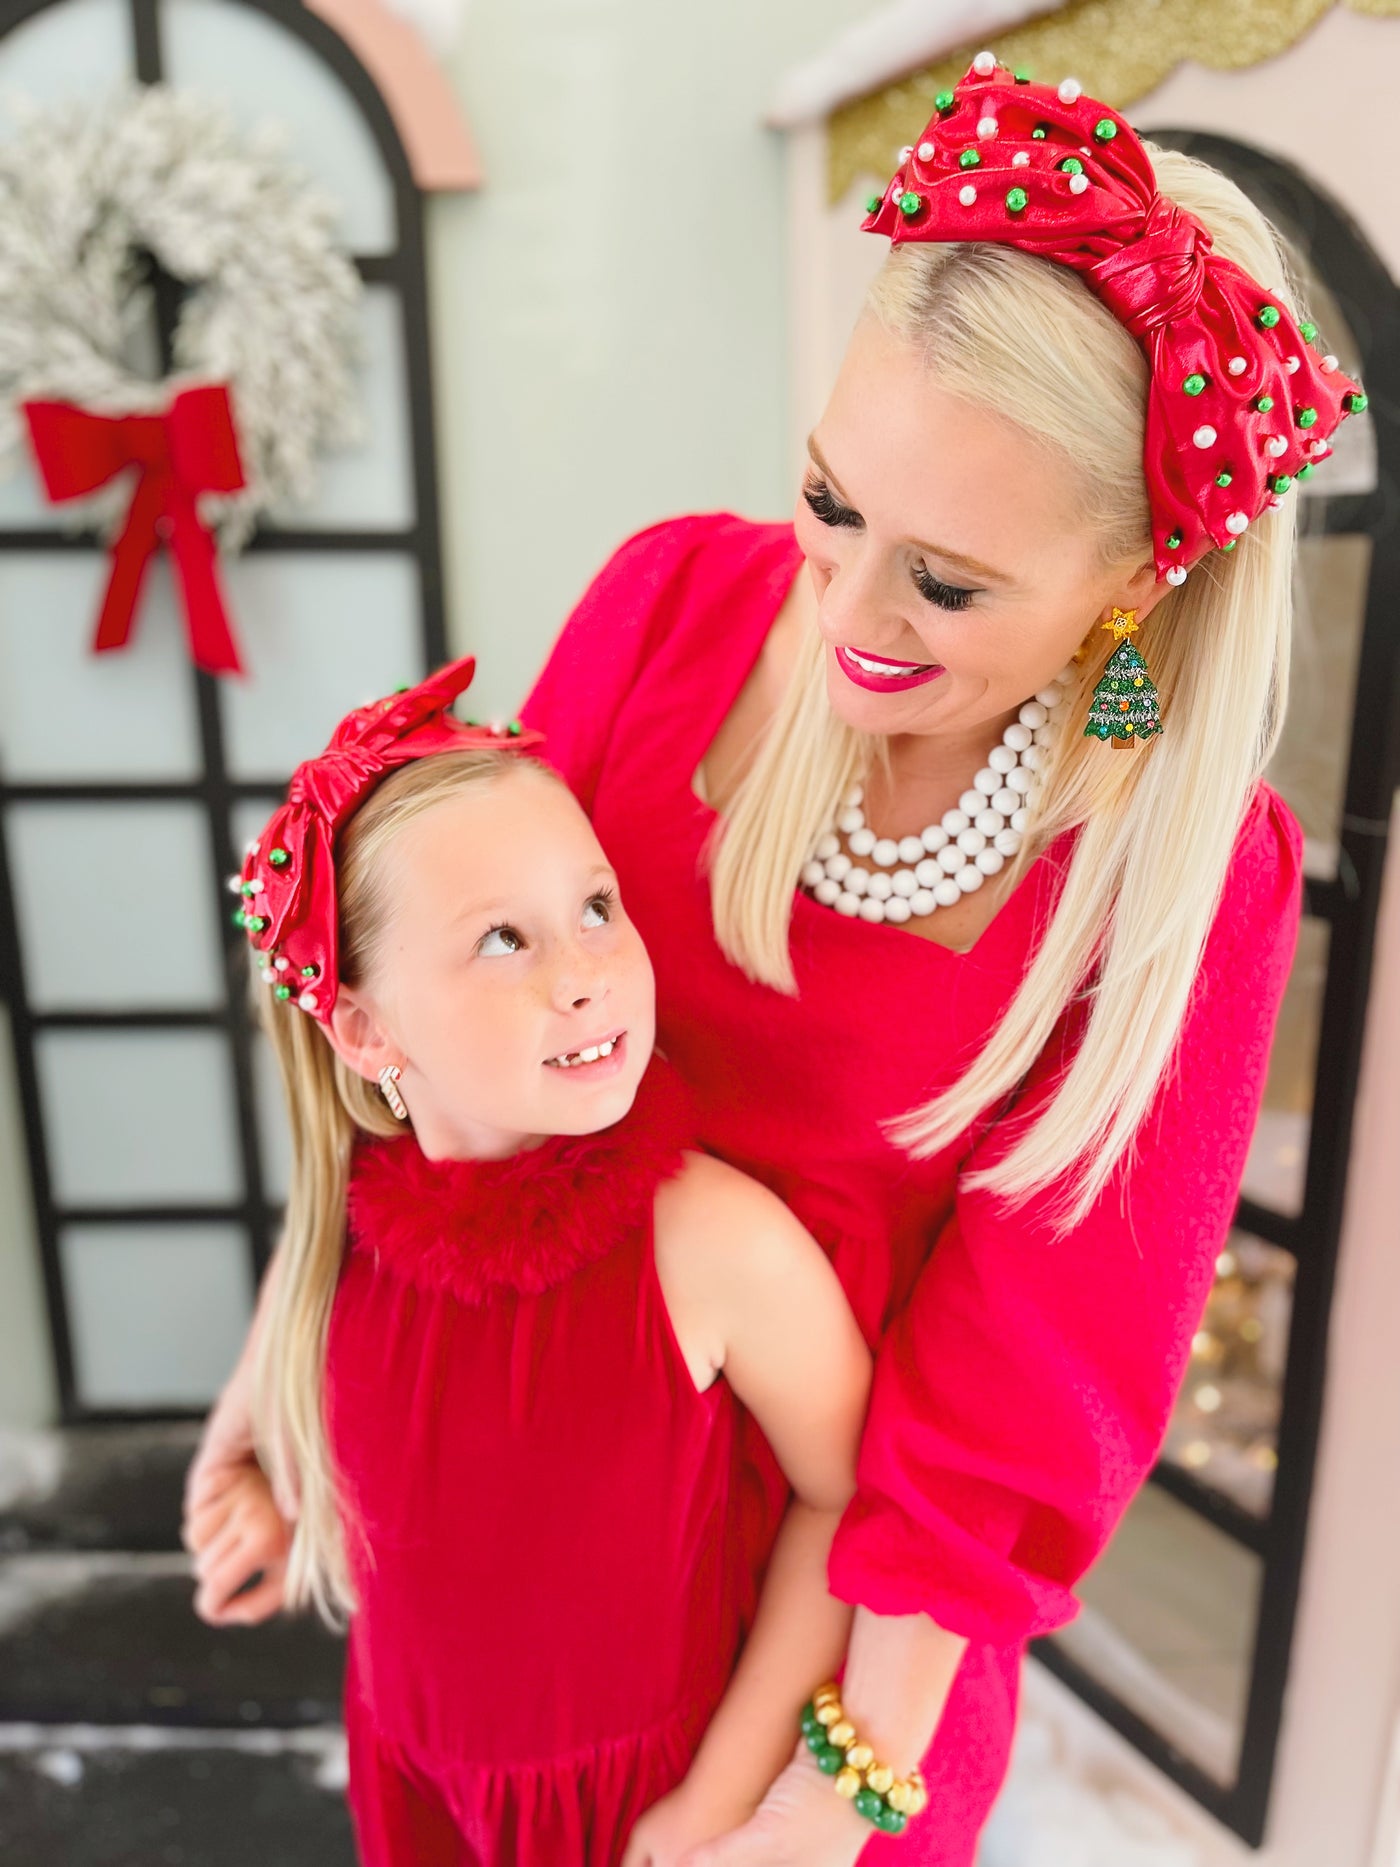 Adult Red Christmas Bow Headband with Beads